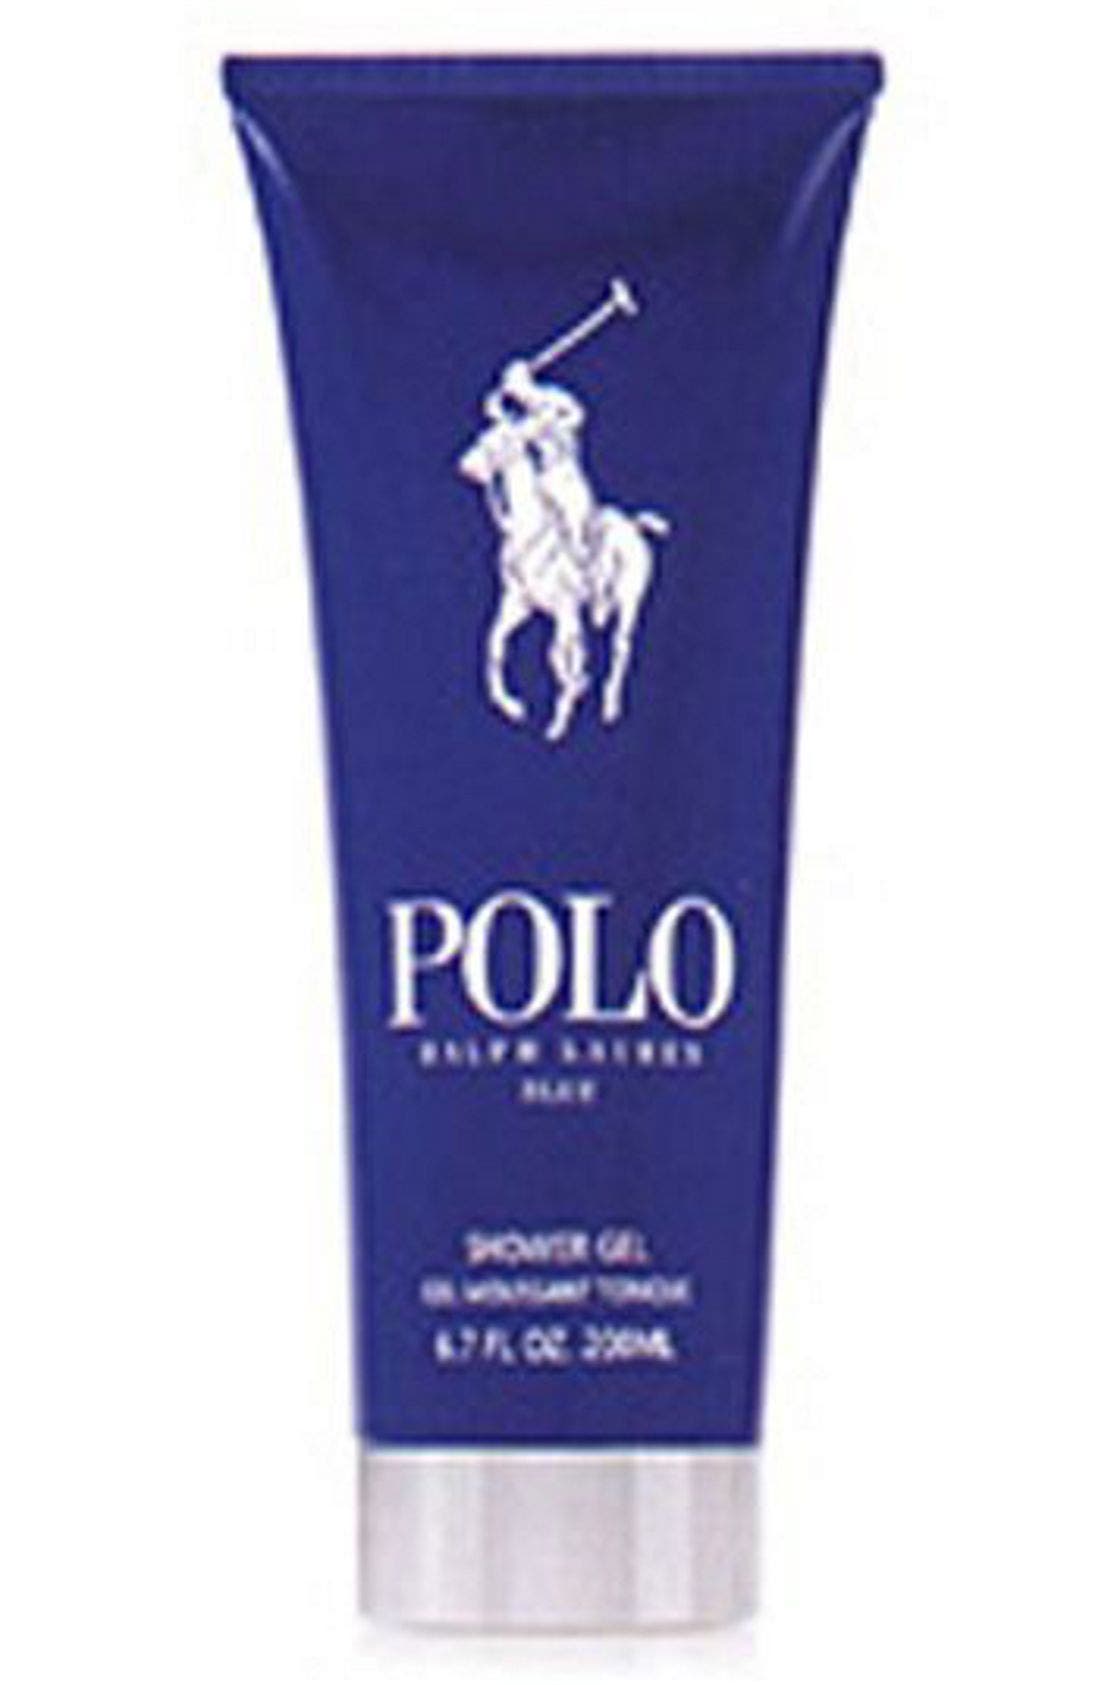 polo blue hair and body wash